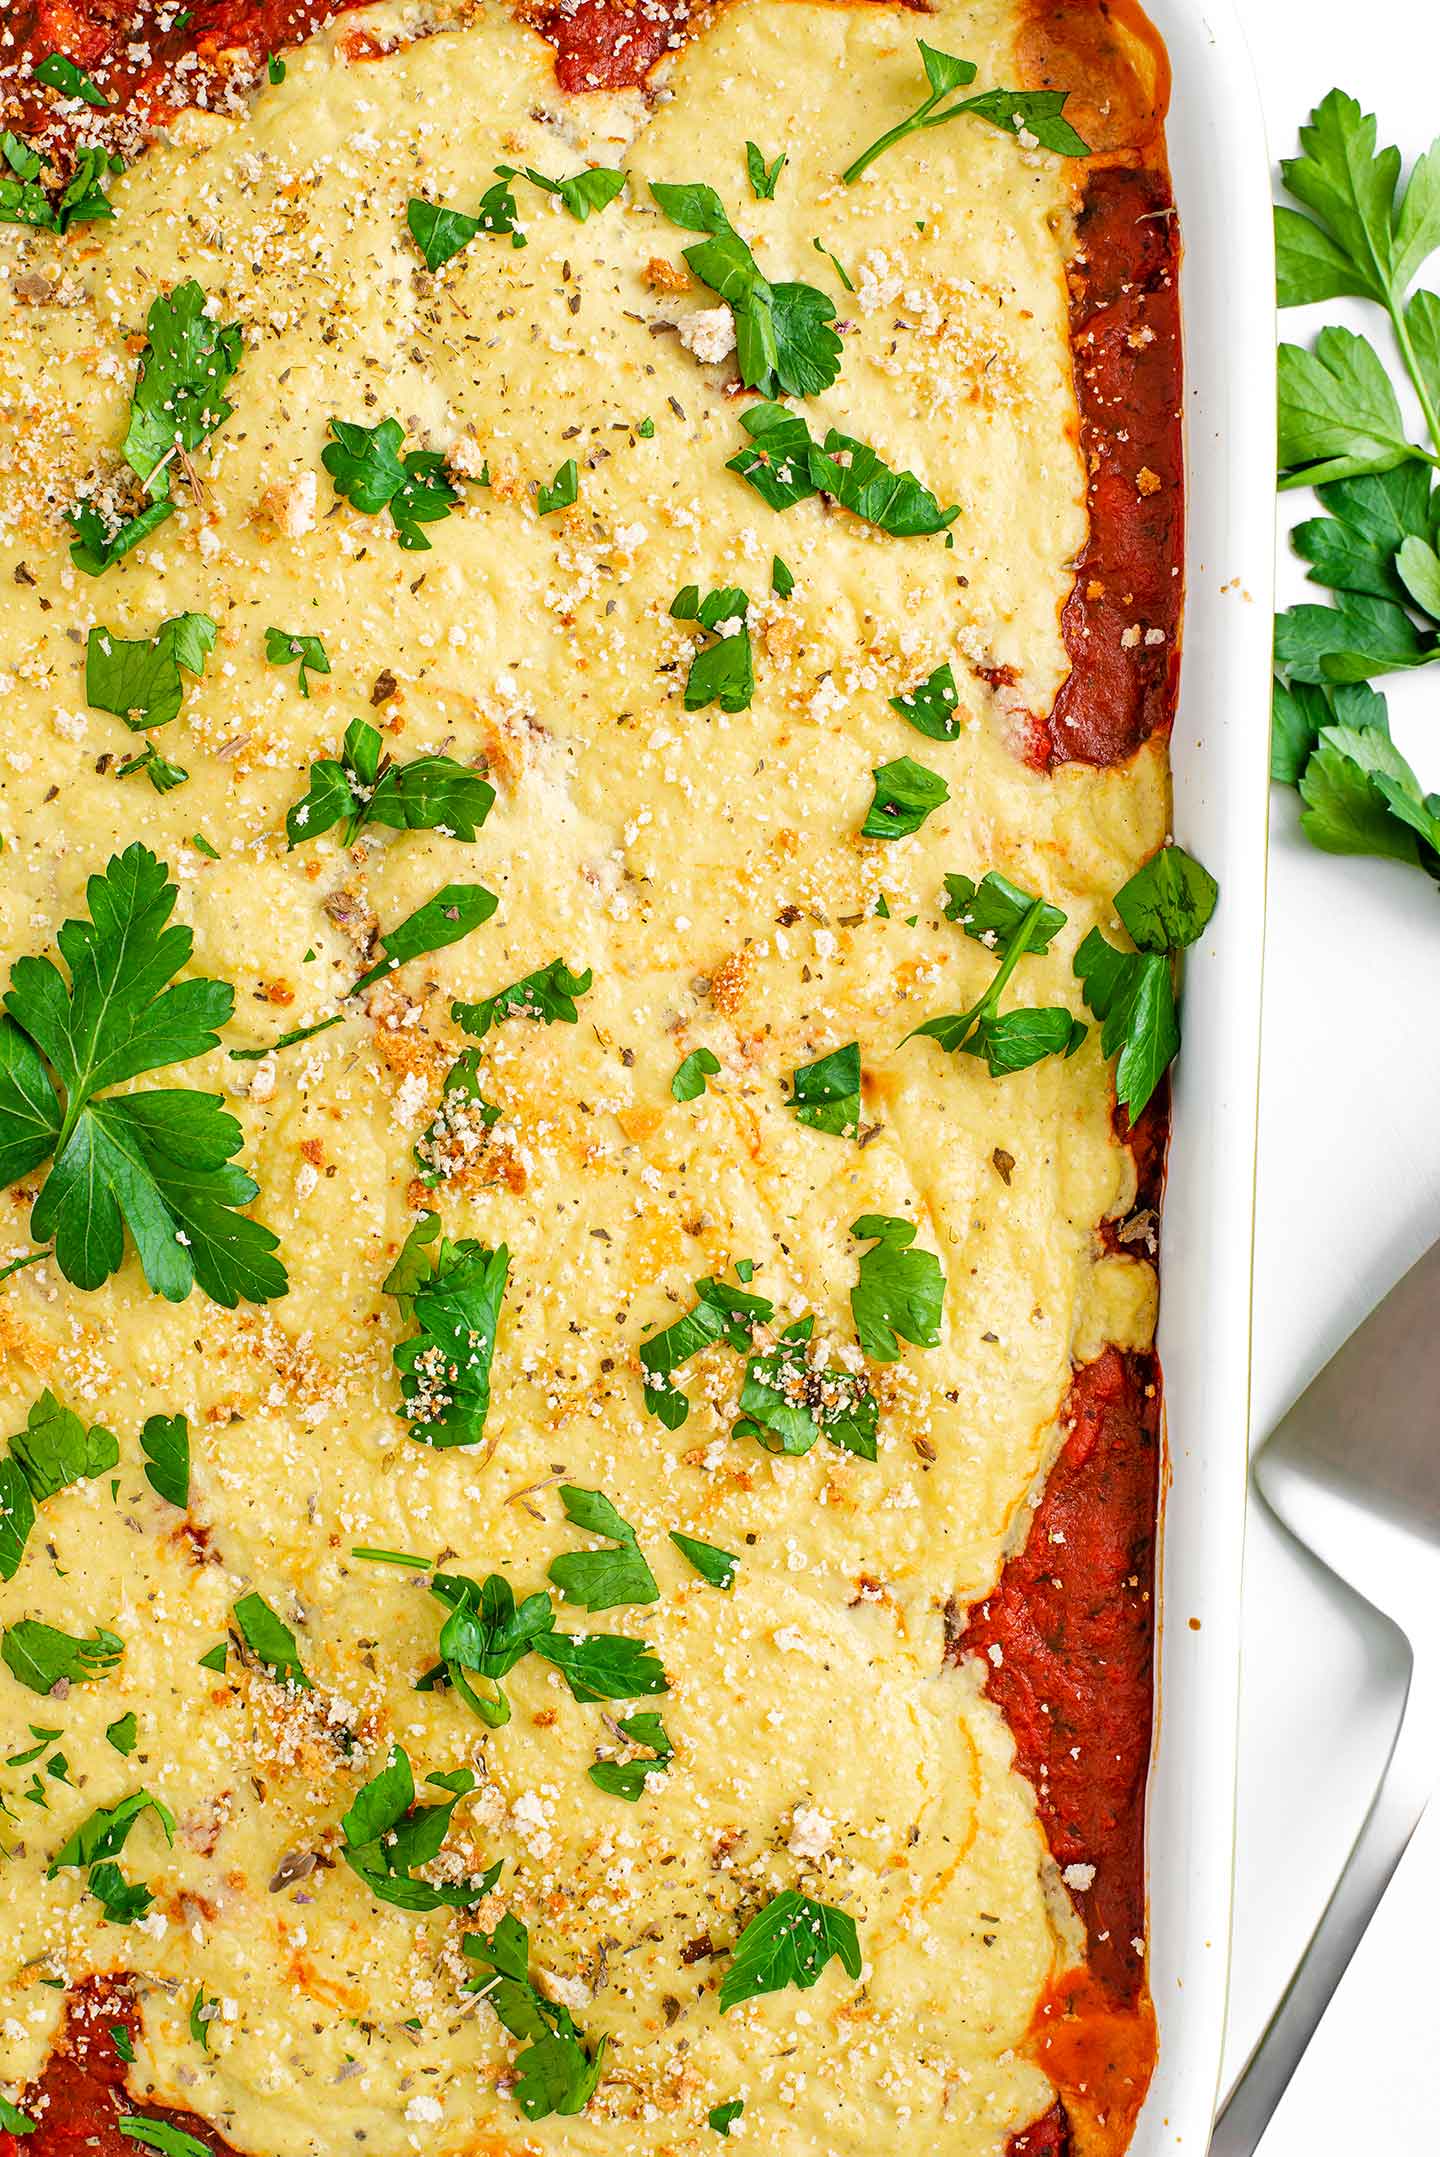 Top down view of vegan baked eggplant "parmesan" in a casserole dish. Parsley sits atop golden bechamel. Tomato sauce peaks through underneath and a spatula lays next to the casserole dish.